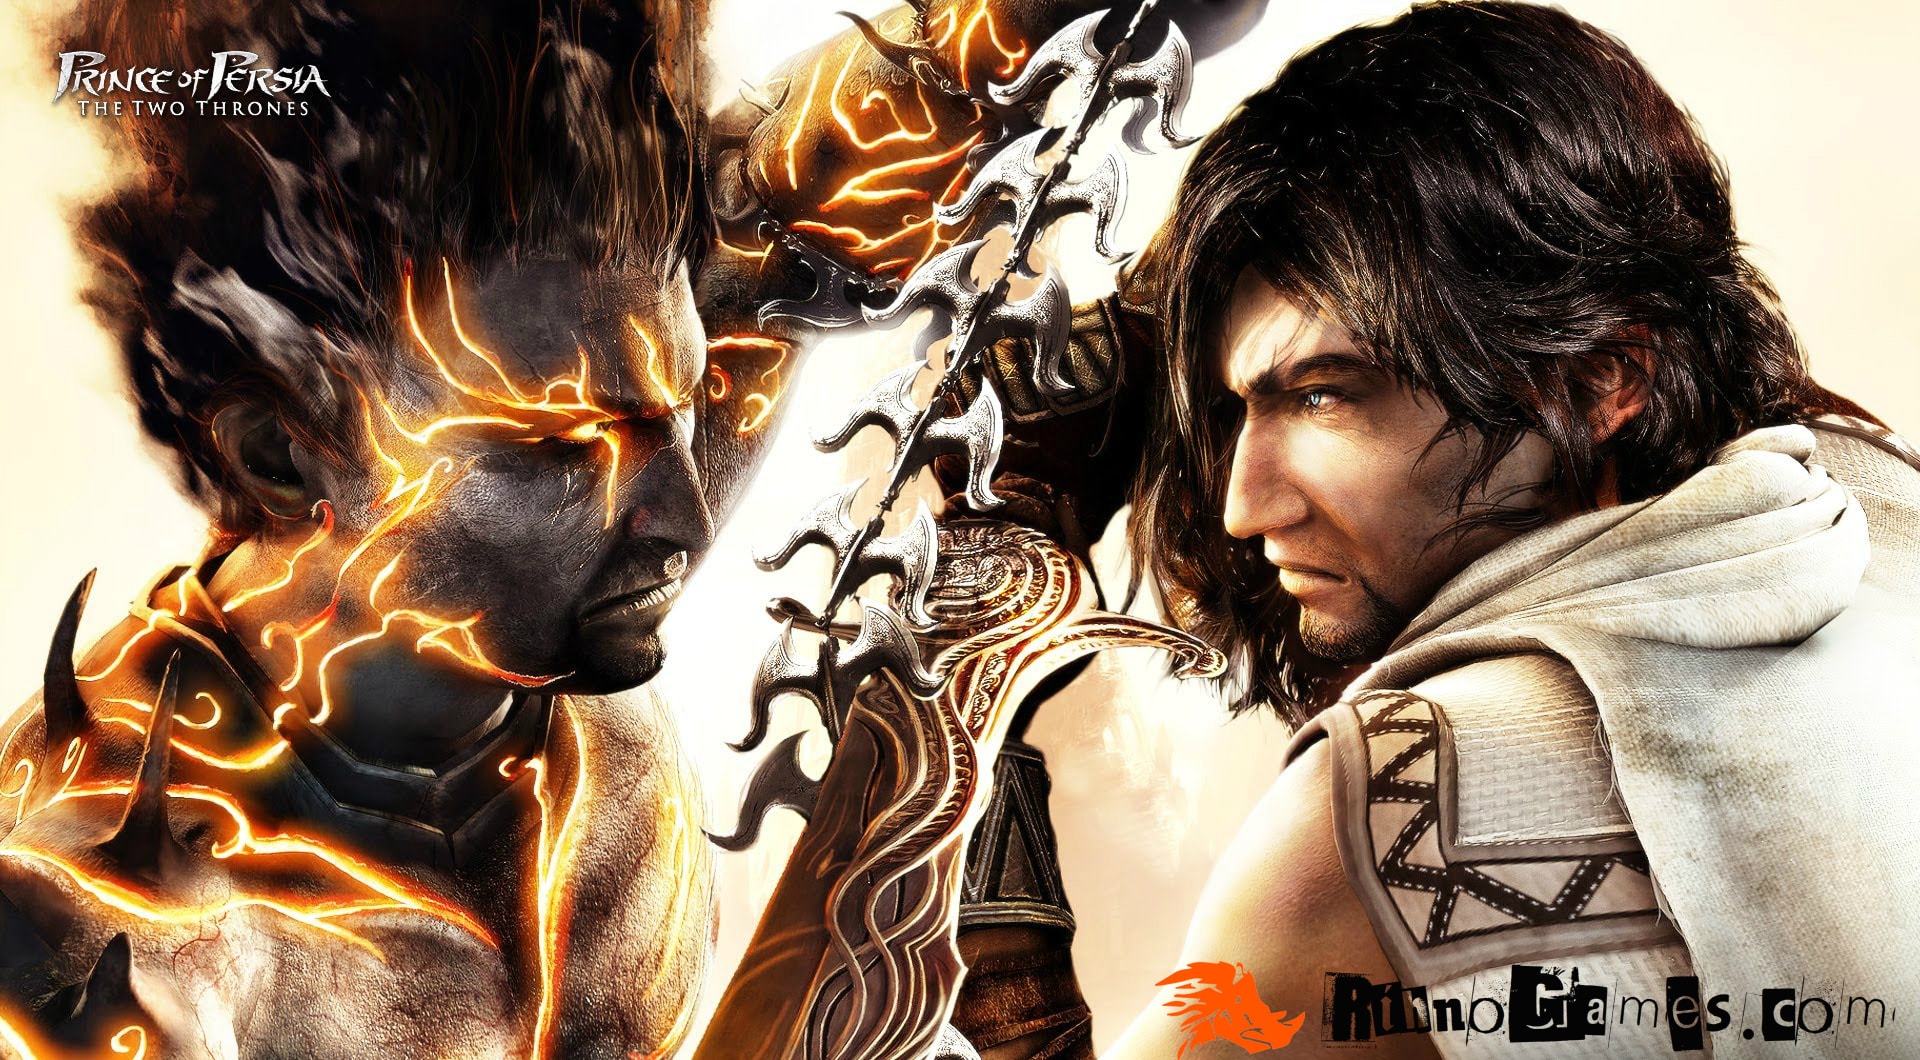 Prince of Persia the Two Thrones System Requirements